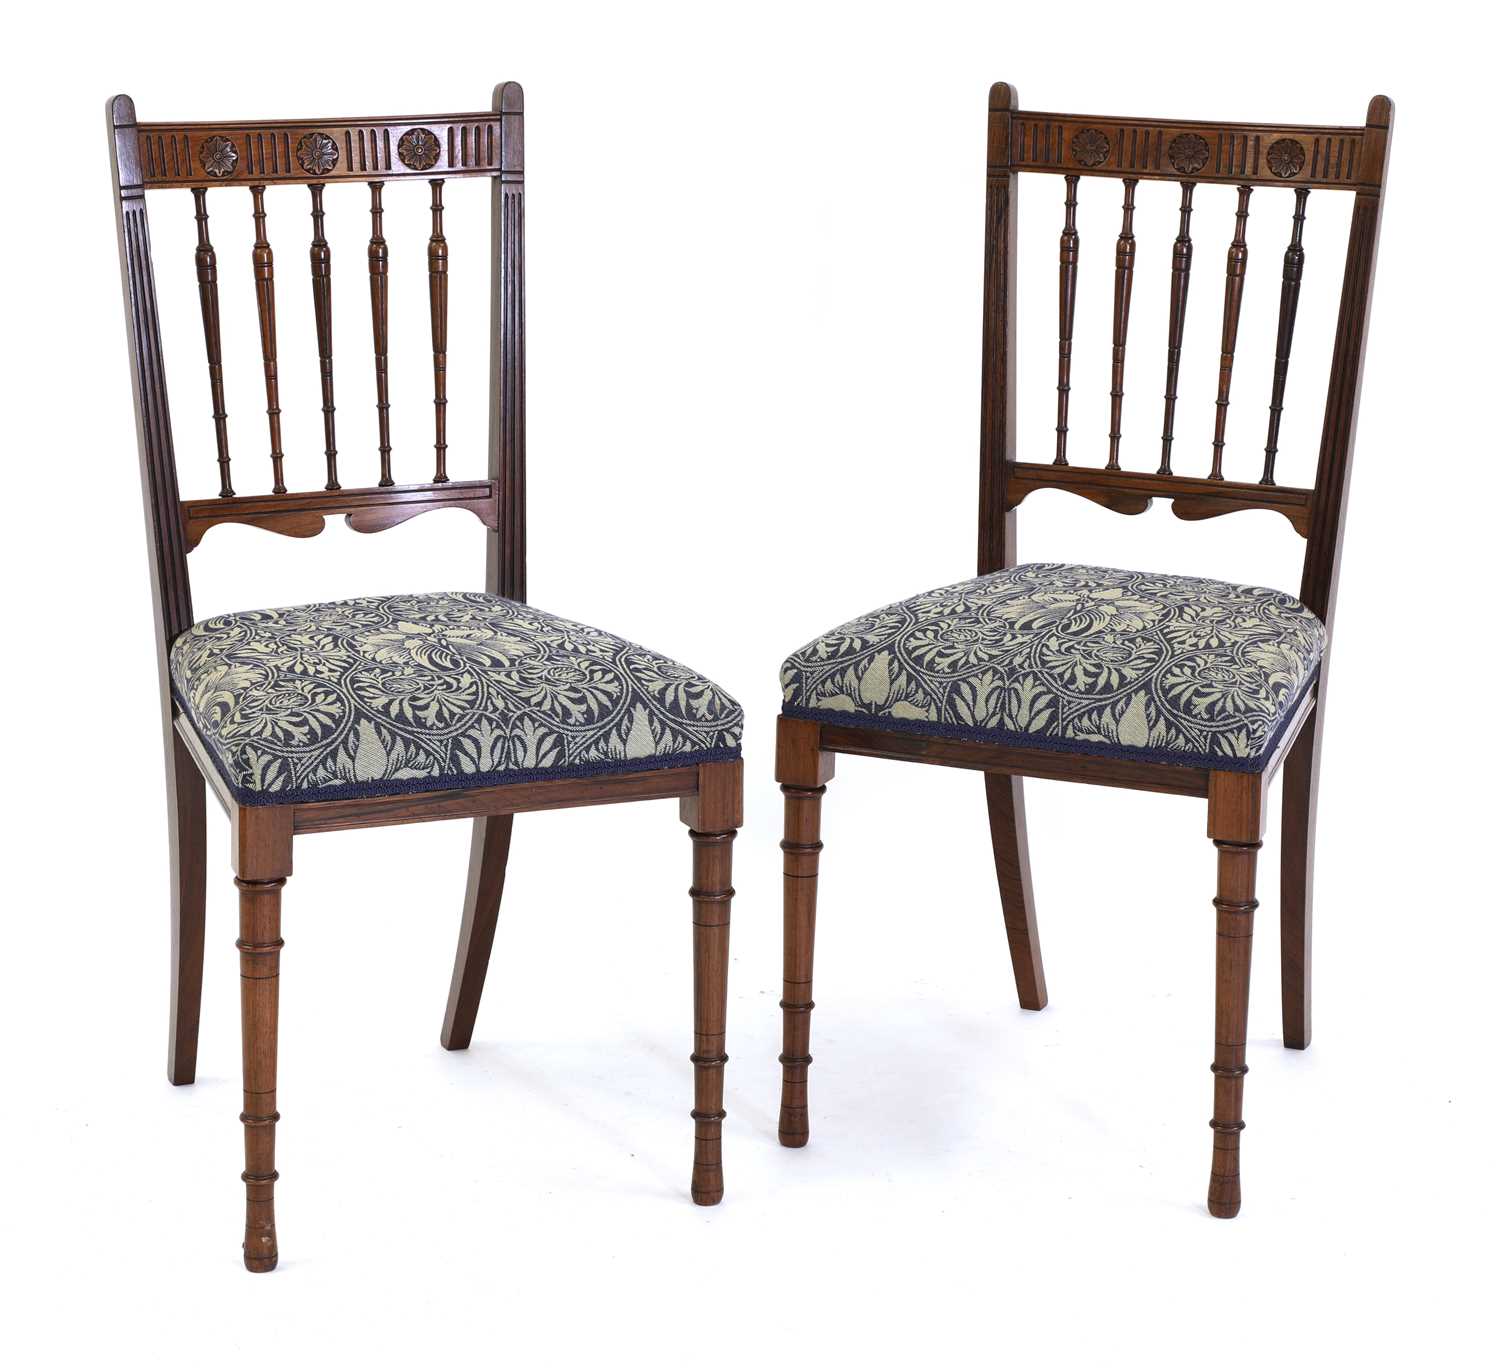 Lot 9 - A fine pair of rosewood side chairs